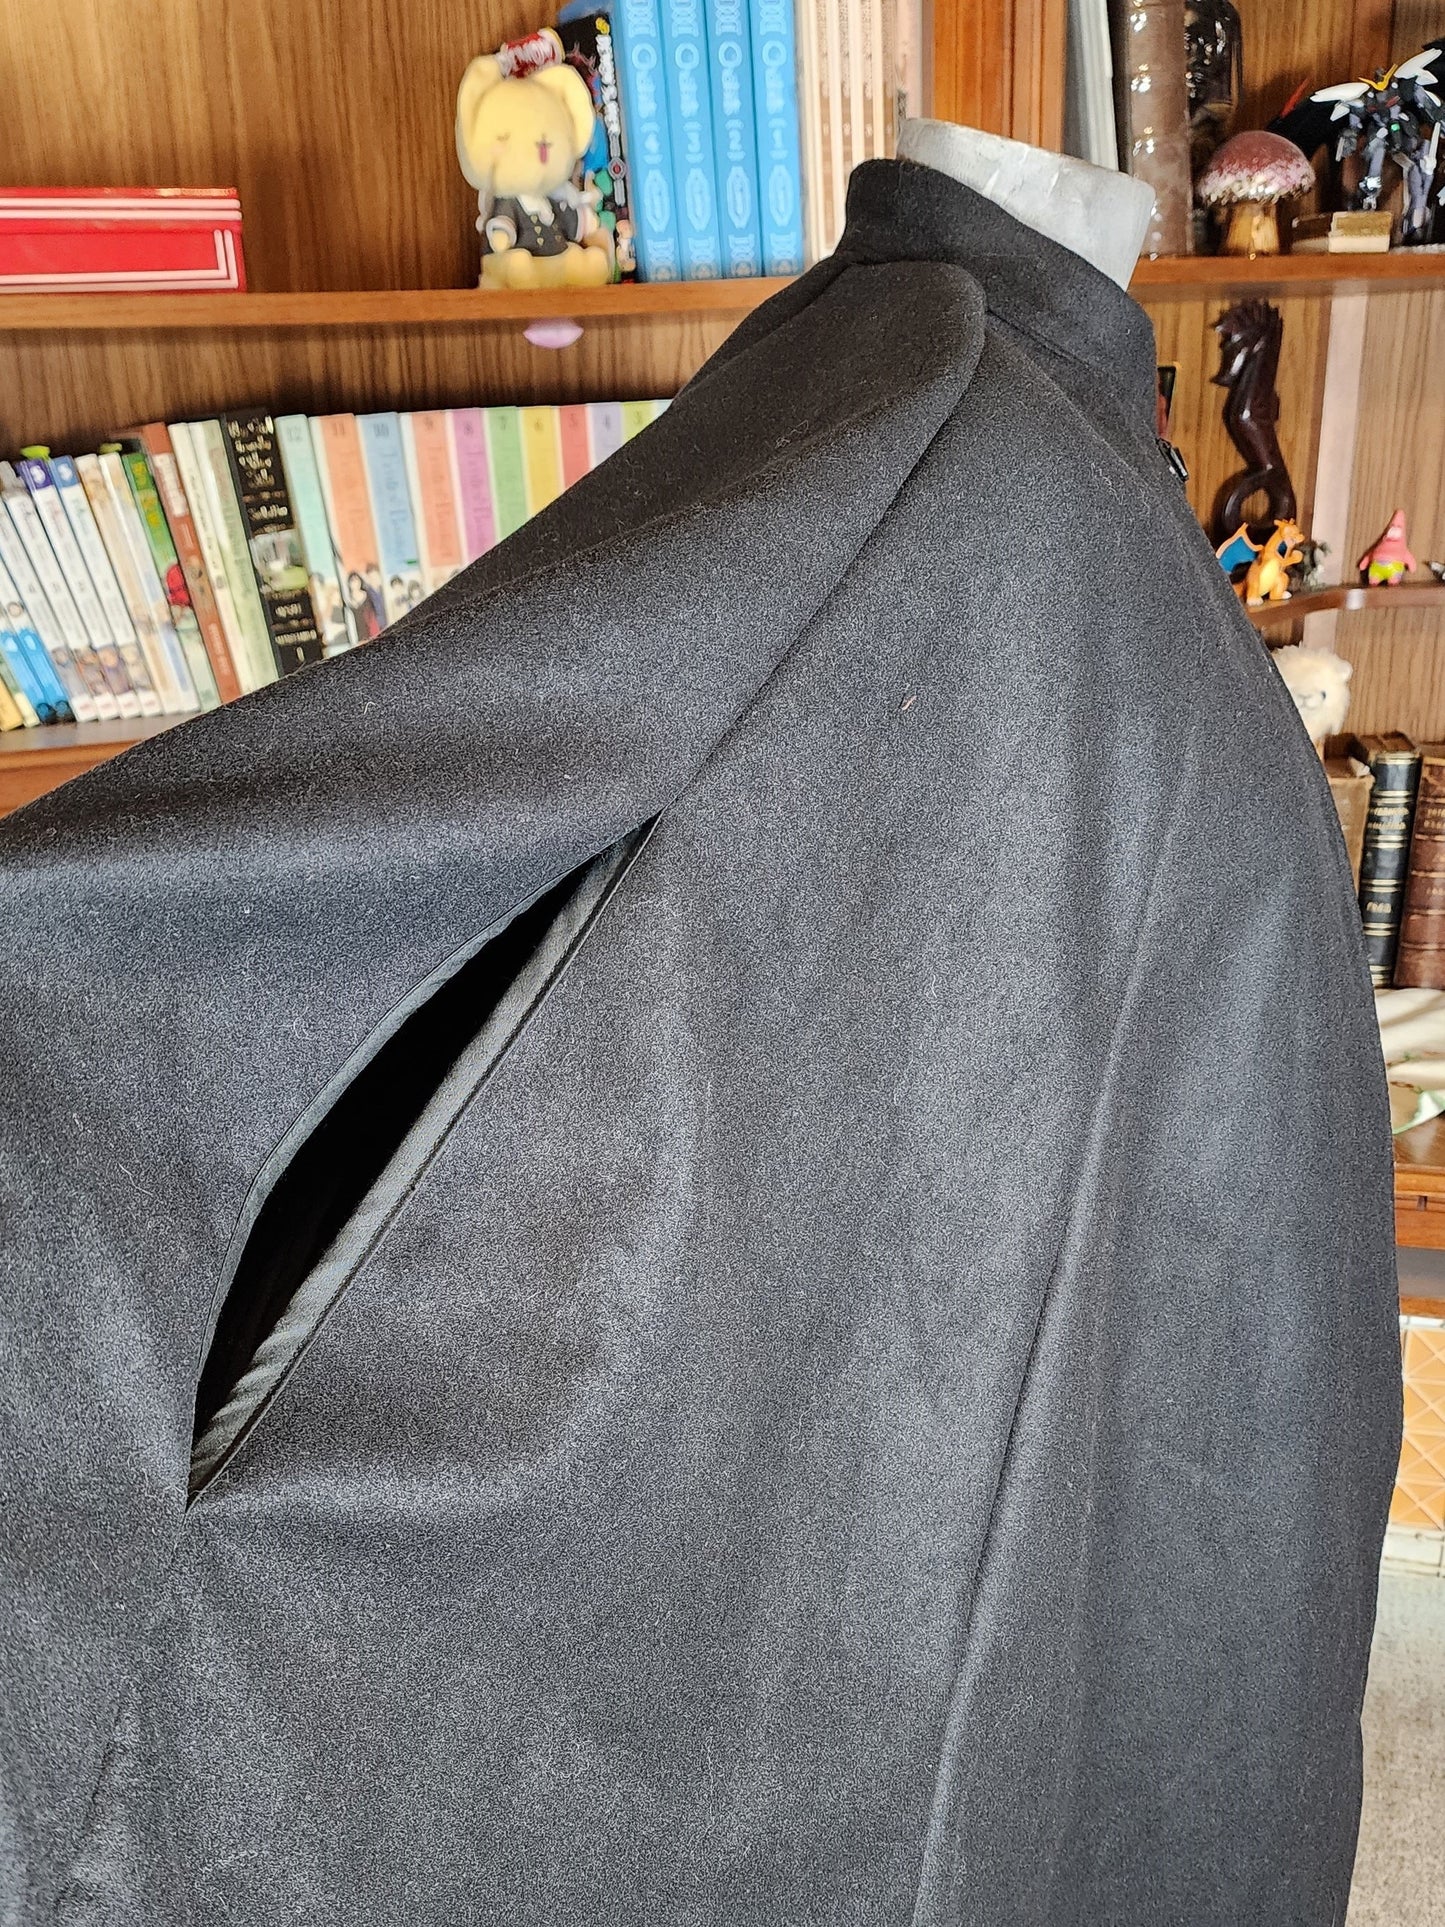 Market Day Cape- Black Wool Blend Mid-Length Cape with Collar and Arm Slits